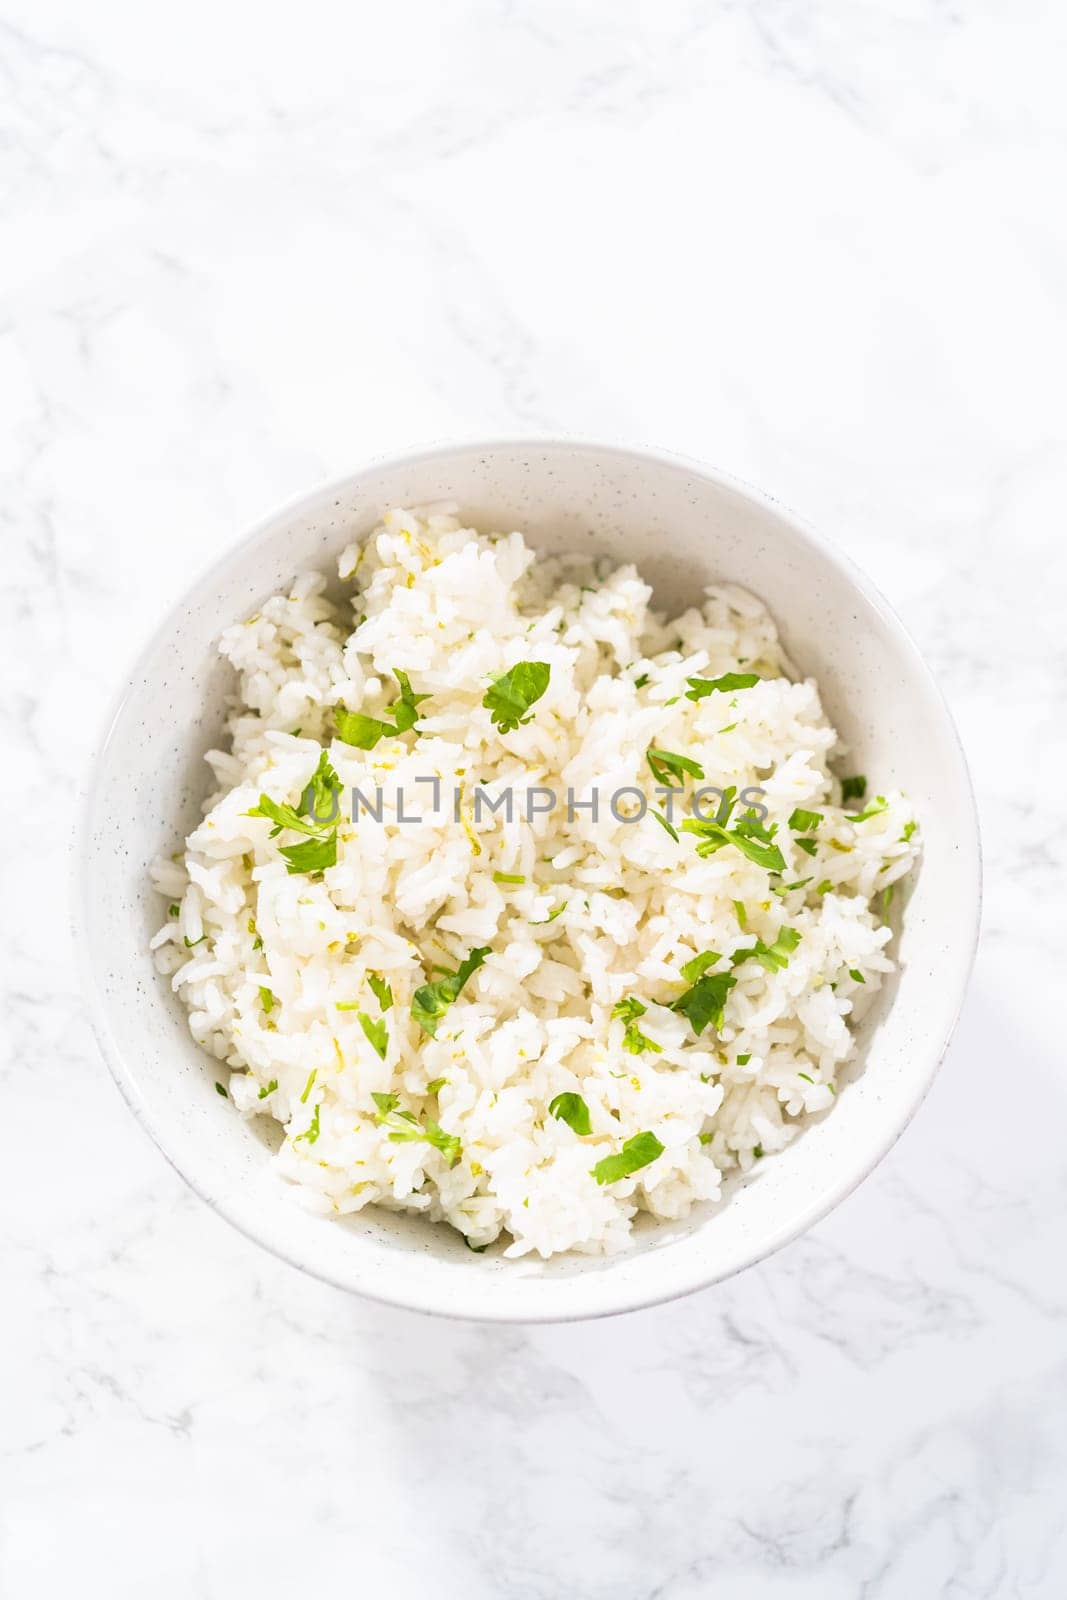 Cilantro Lime Rice. Serving cilantro lime rice garnished with fresh parsley in white ceramic bowls.